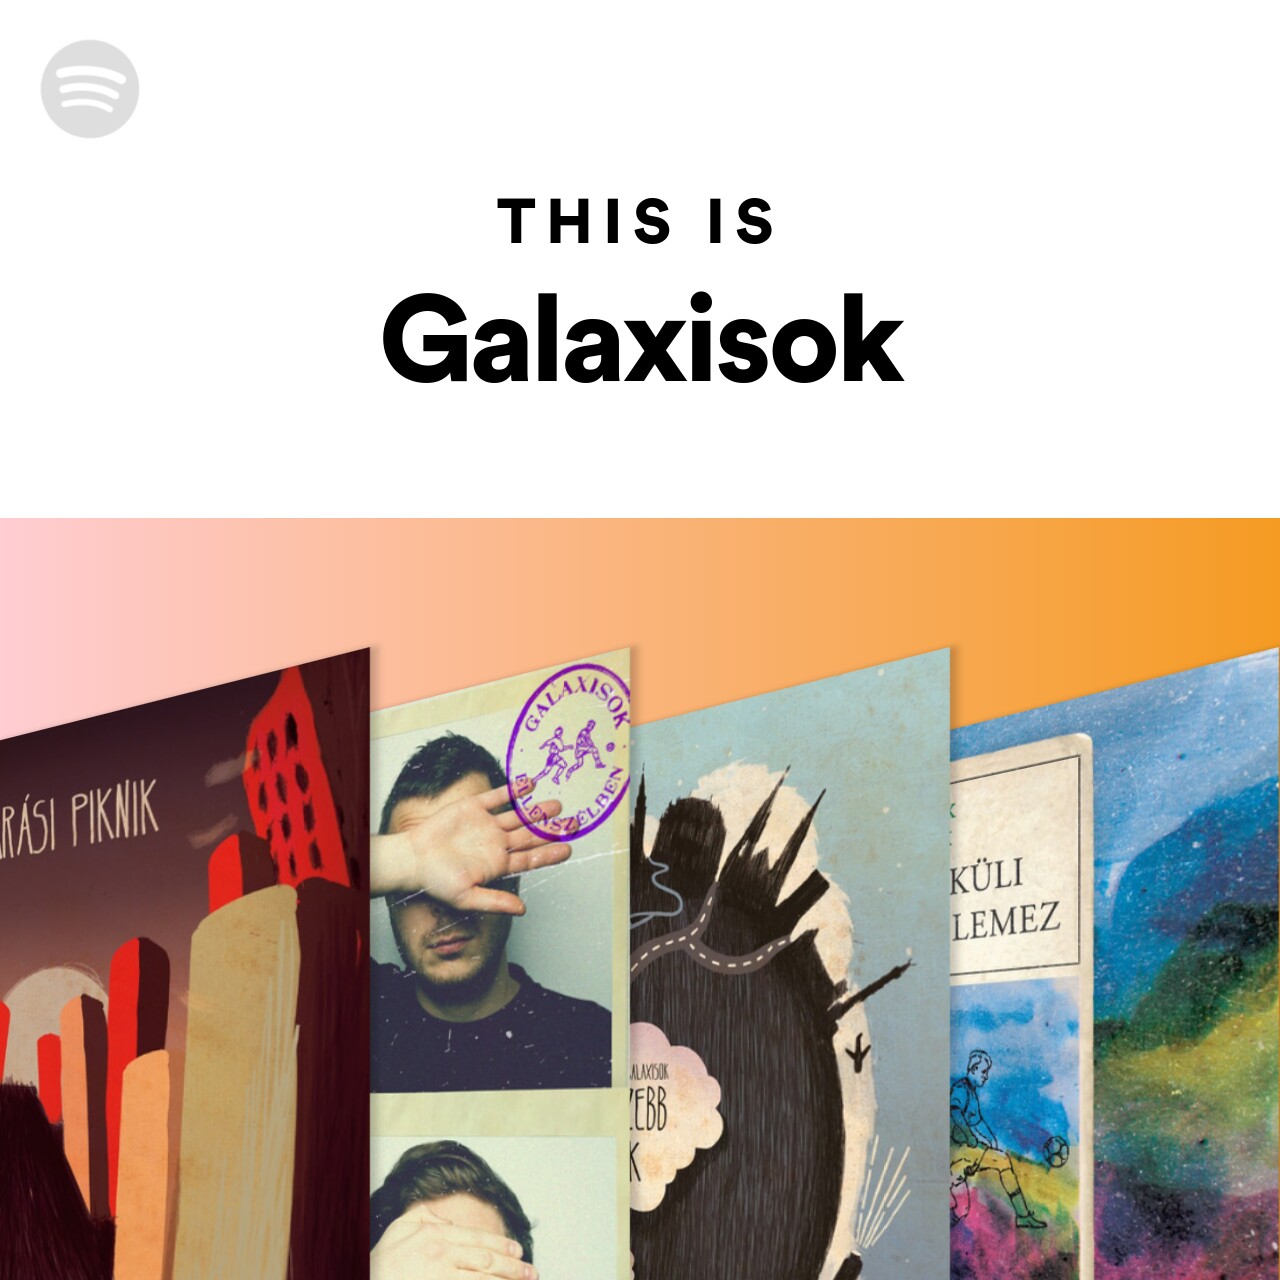 This Is Galaxisok